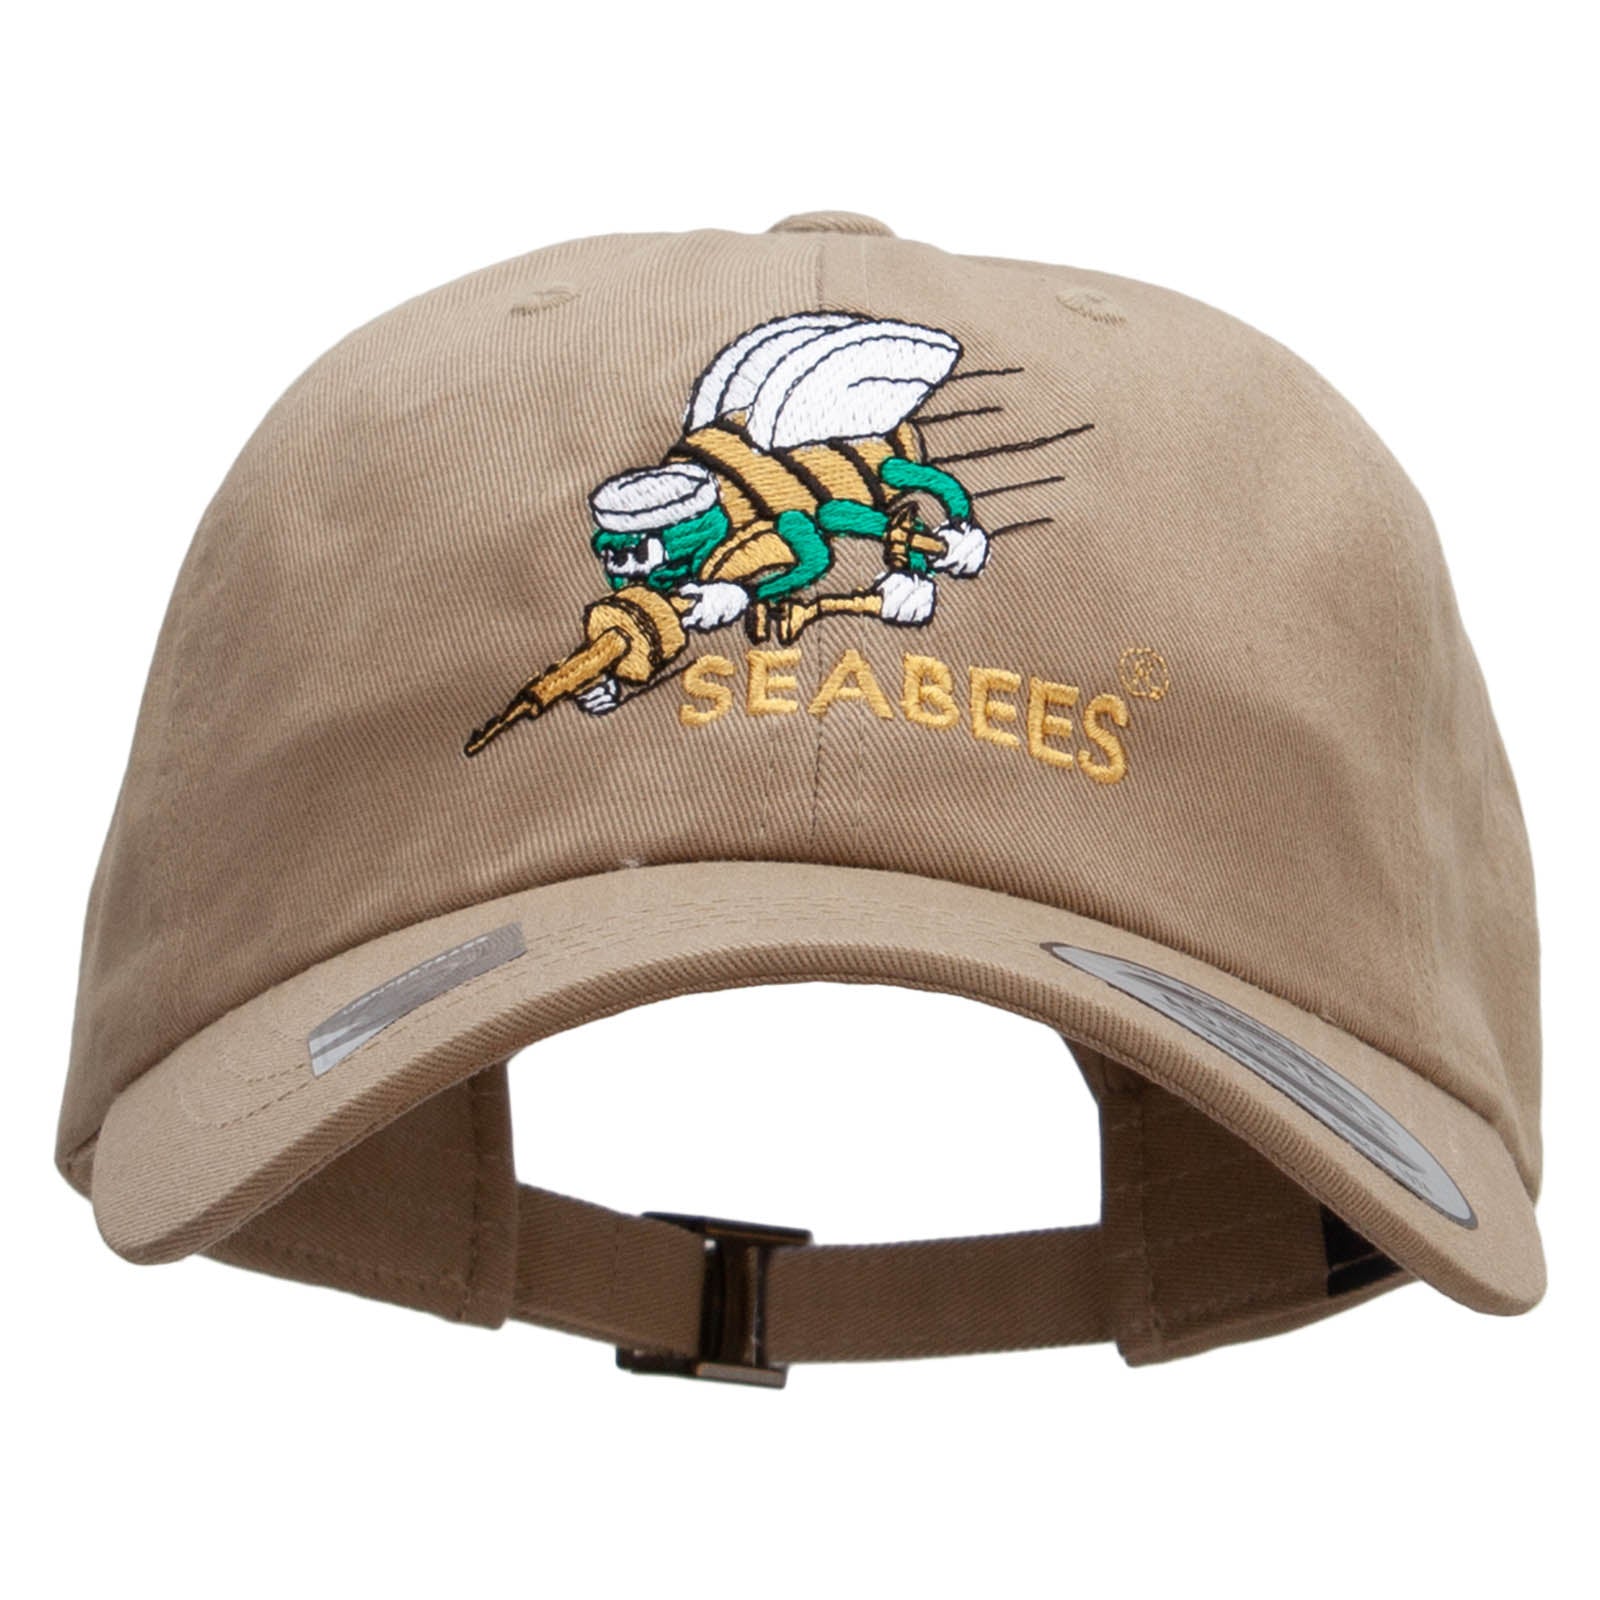 Licensed United States Navy Seabees Unstructured Low Profile 6 panel Cotton Cap - Khaki OSFM